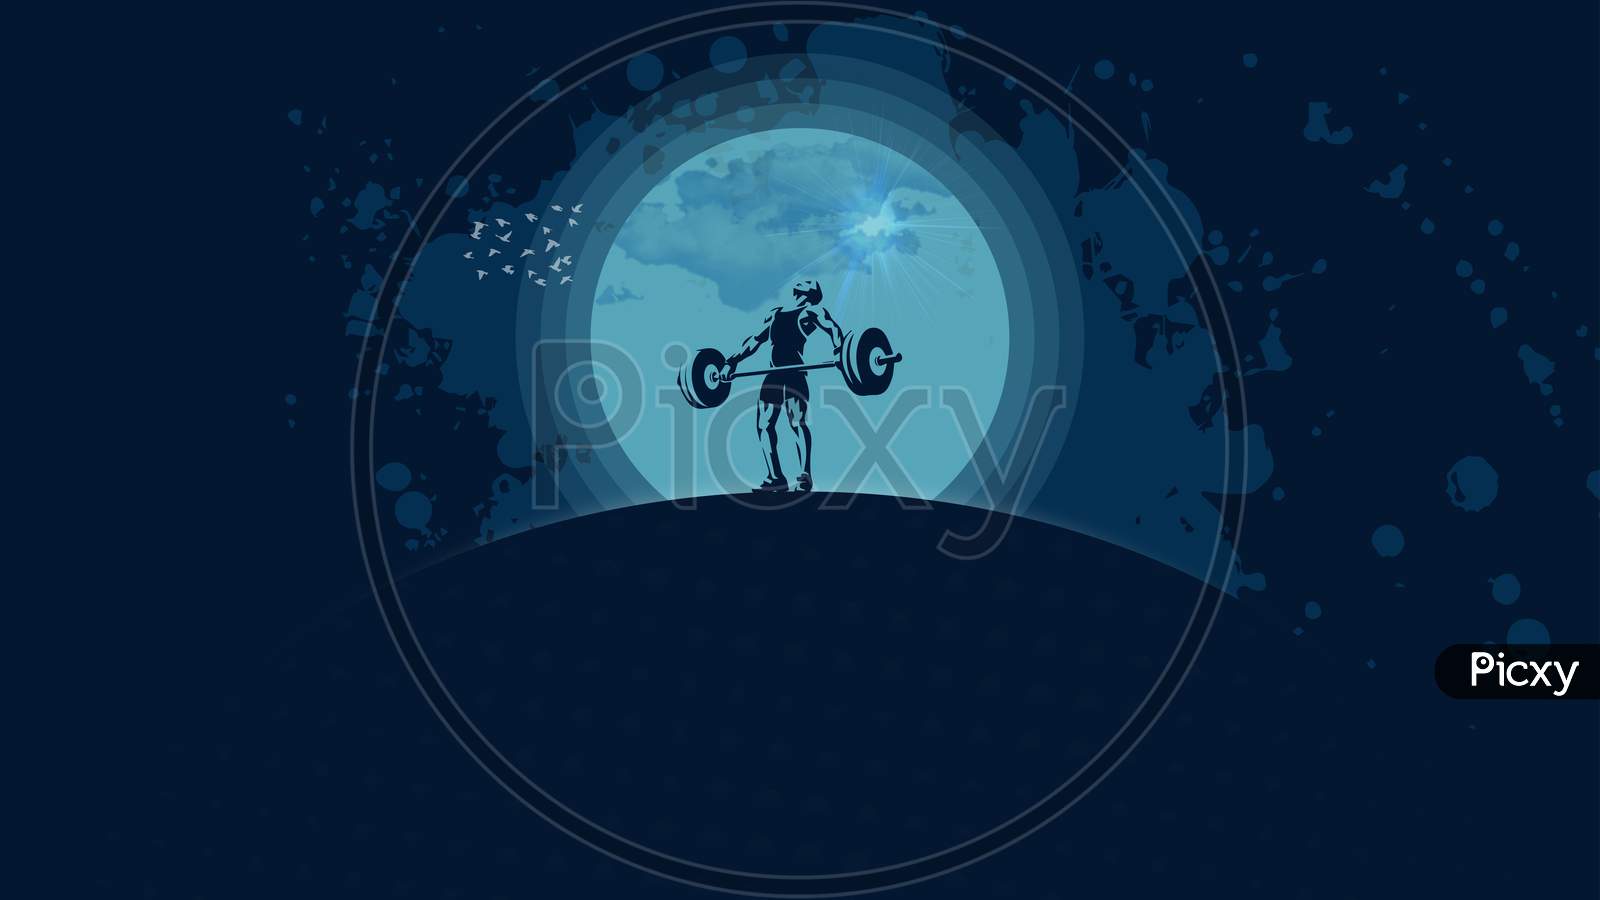 Graphical Design Of An Weight Lifting Athlete Besides The Moon With Dark Blue Colored Texture.